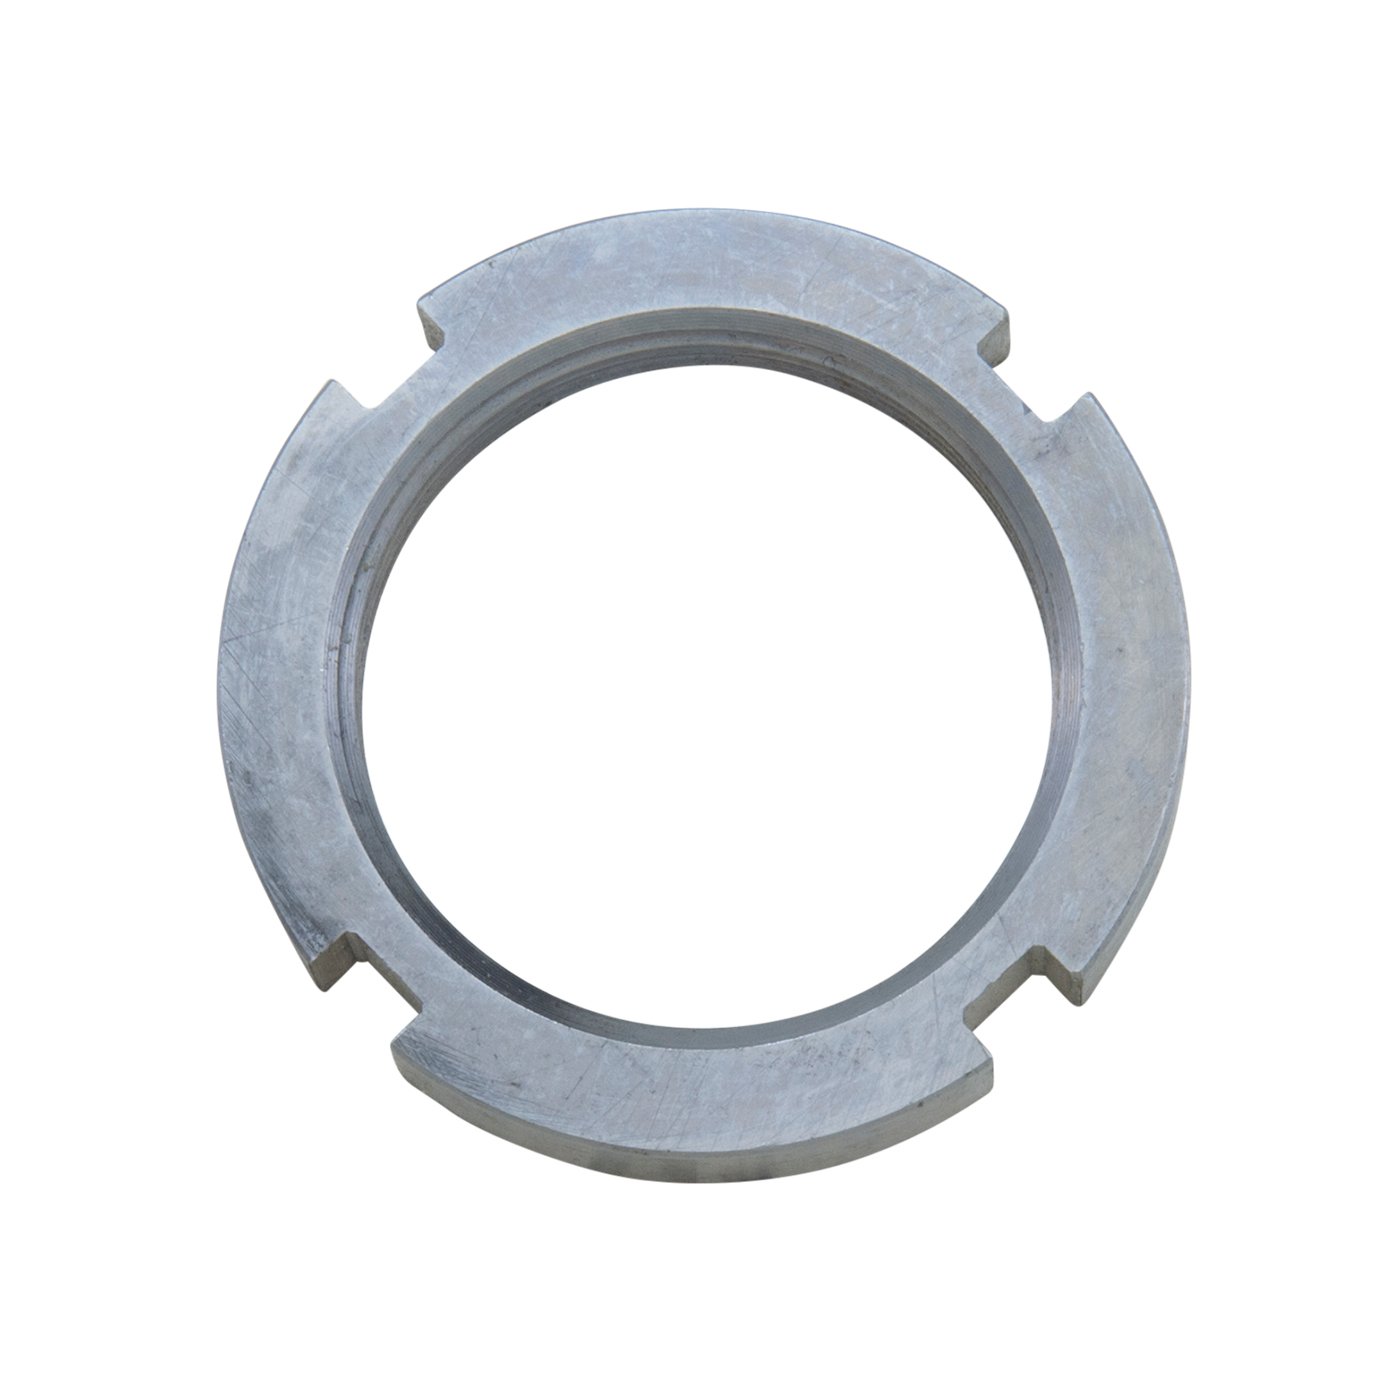 Spindle Nut For Dana 70, 1.940 in. I.D., 6 Slots.